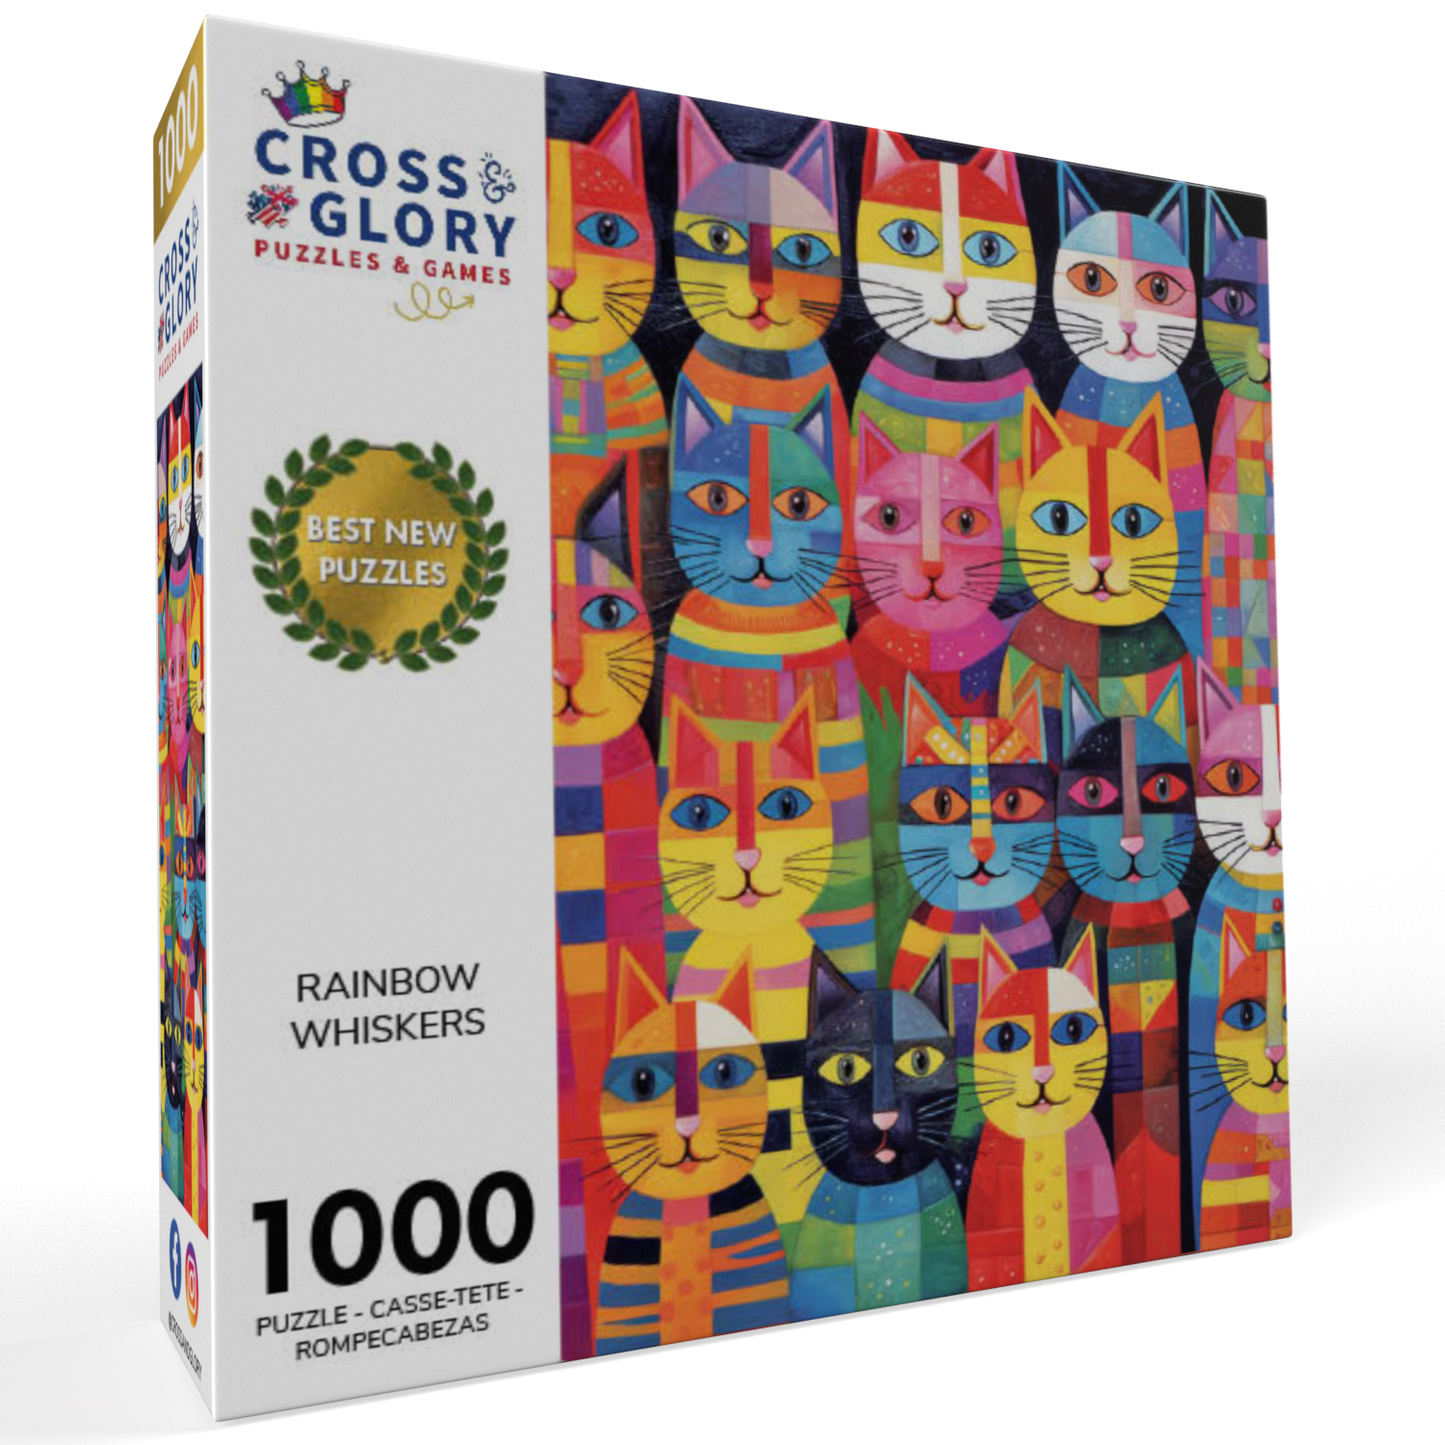 Rainbow Whiskers - Whimsical Cat - 1000 Piece Jigsaw Puzzle